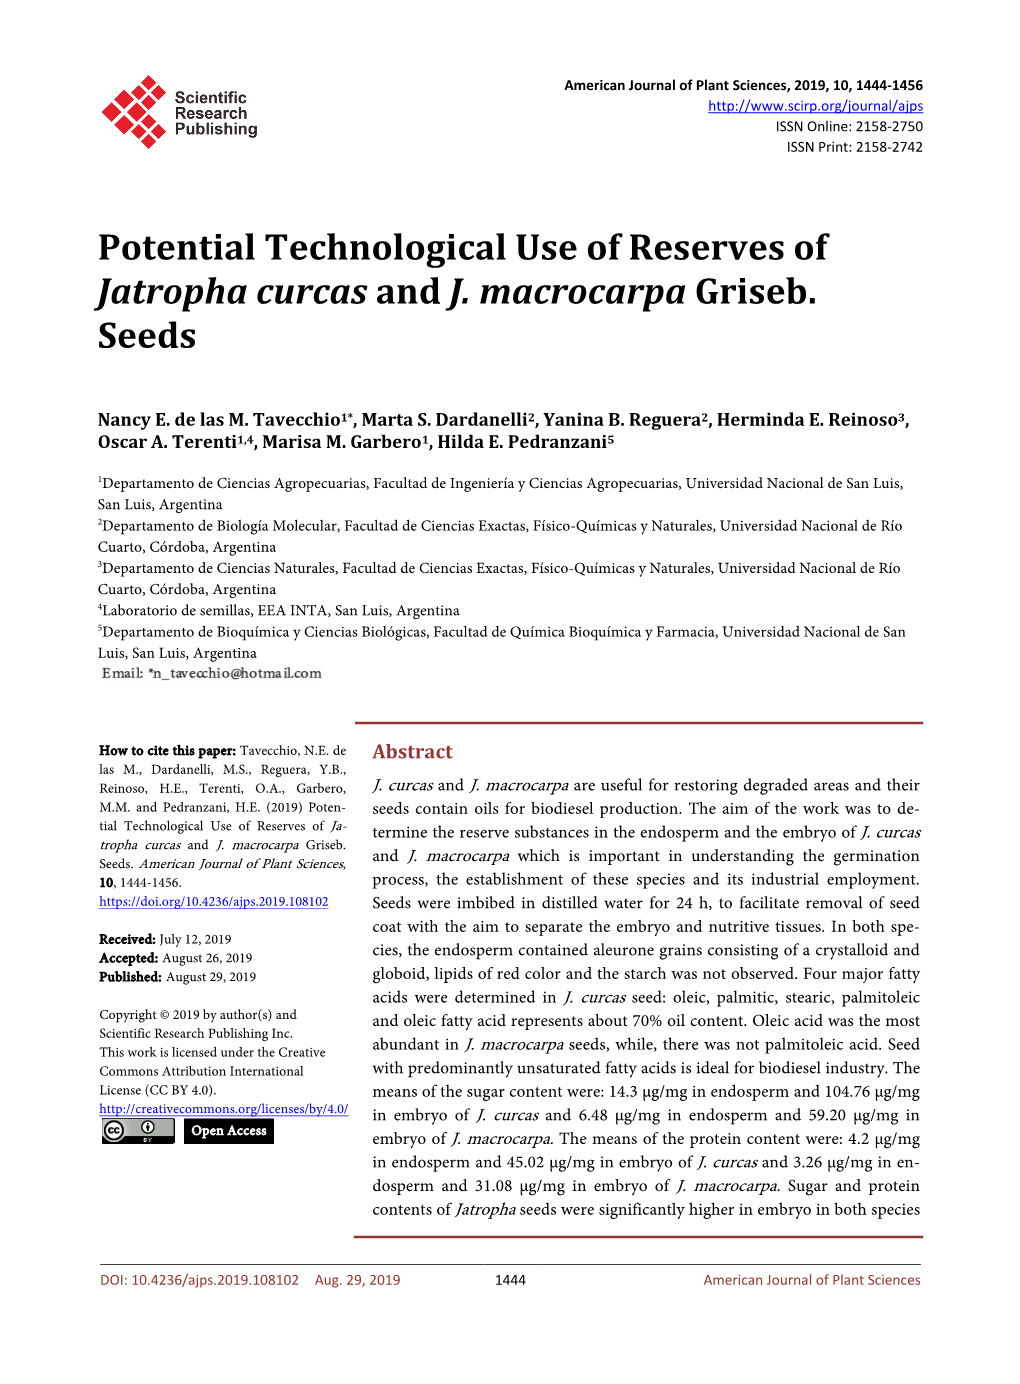 Potential Technological Use of Reserves of Jatropha Curcas and J